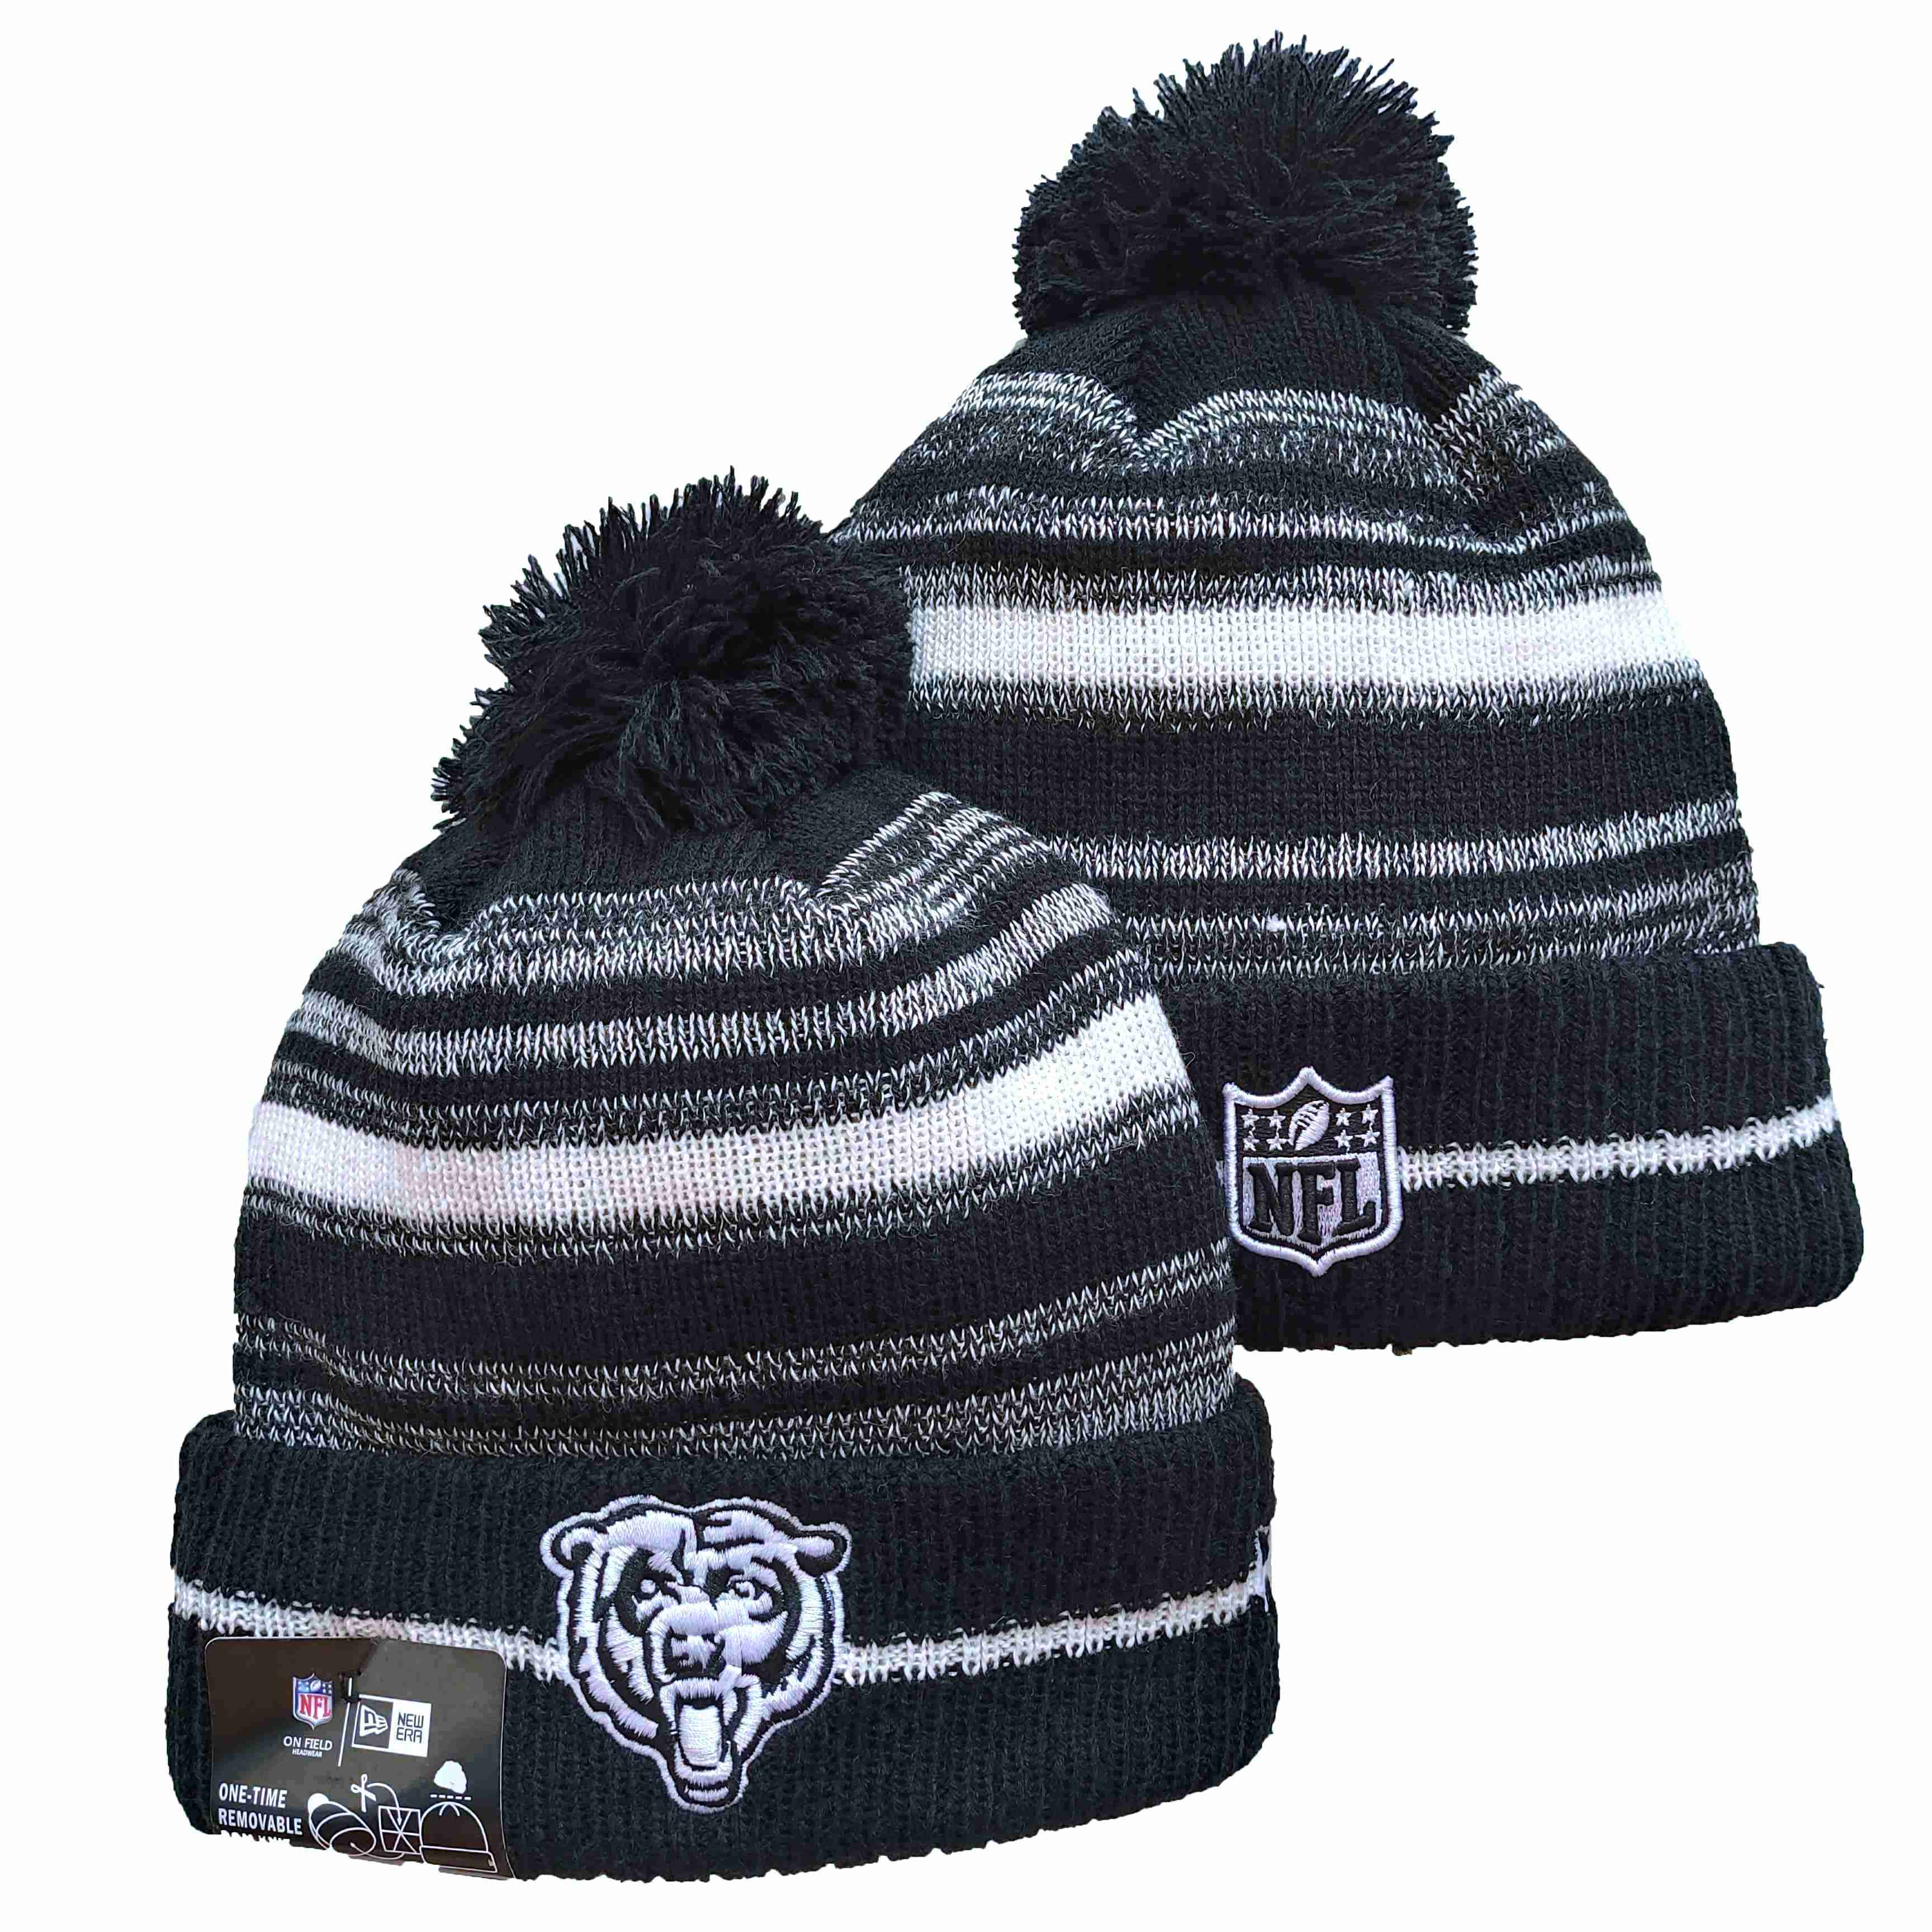 Chicago Bears Knit Hats -8